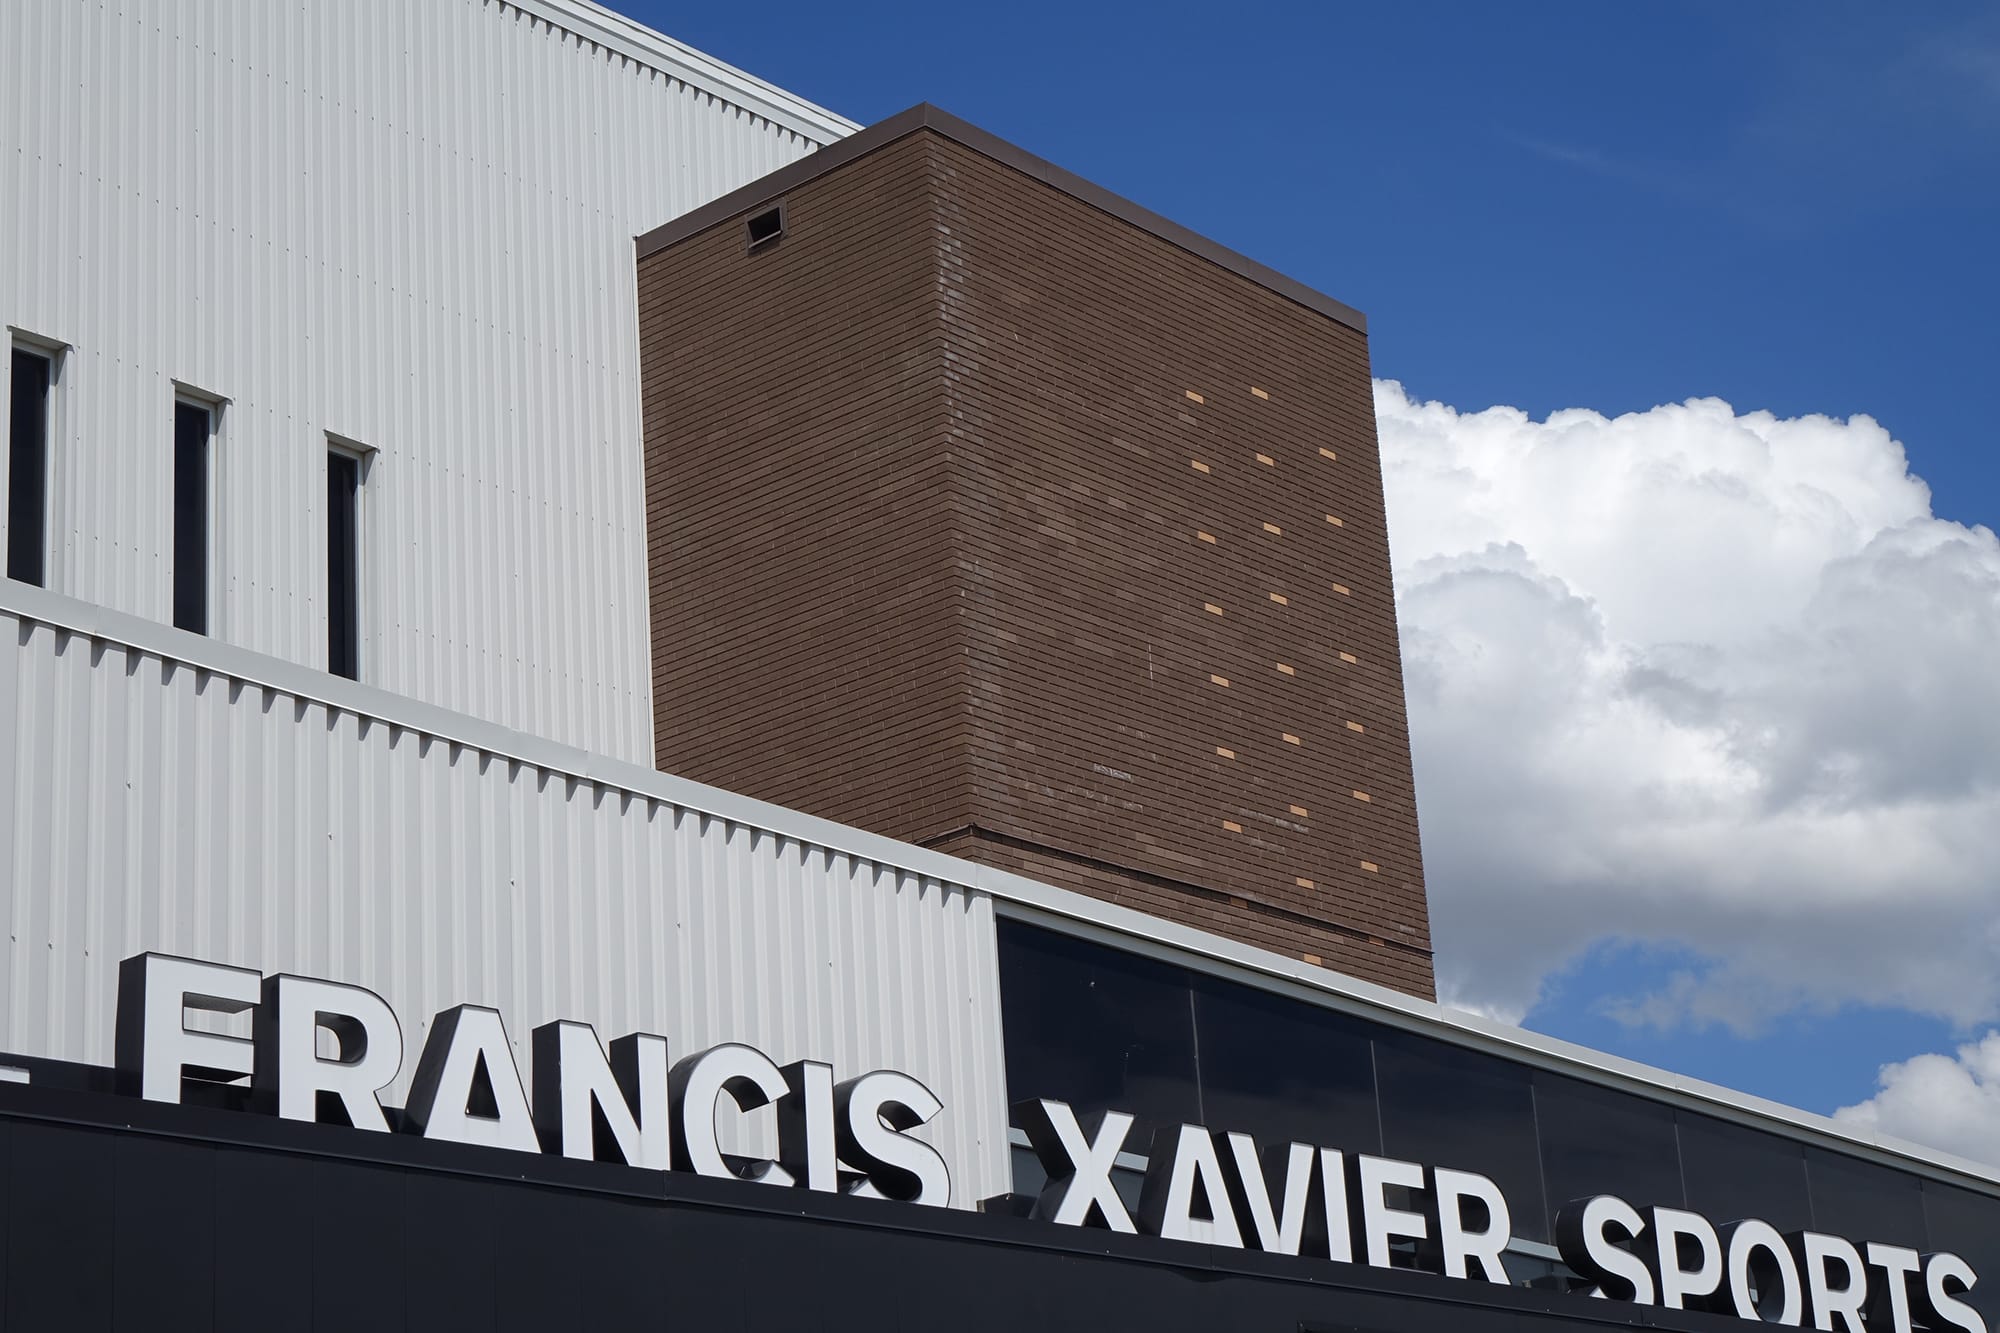 St-Francis Xavier Sports Centre exterior with signage